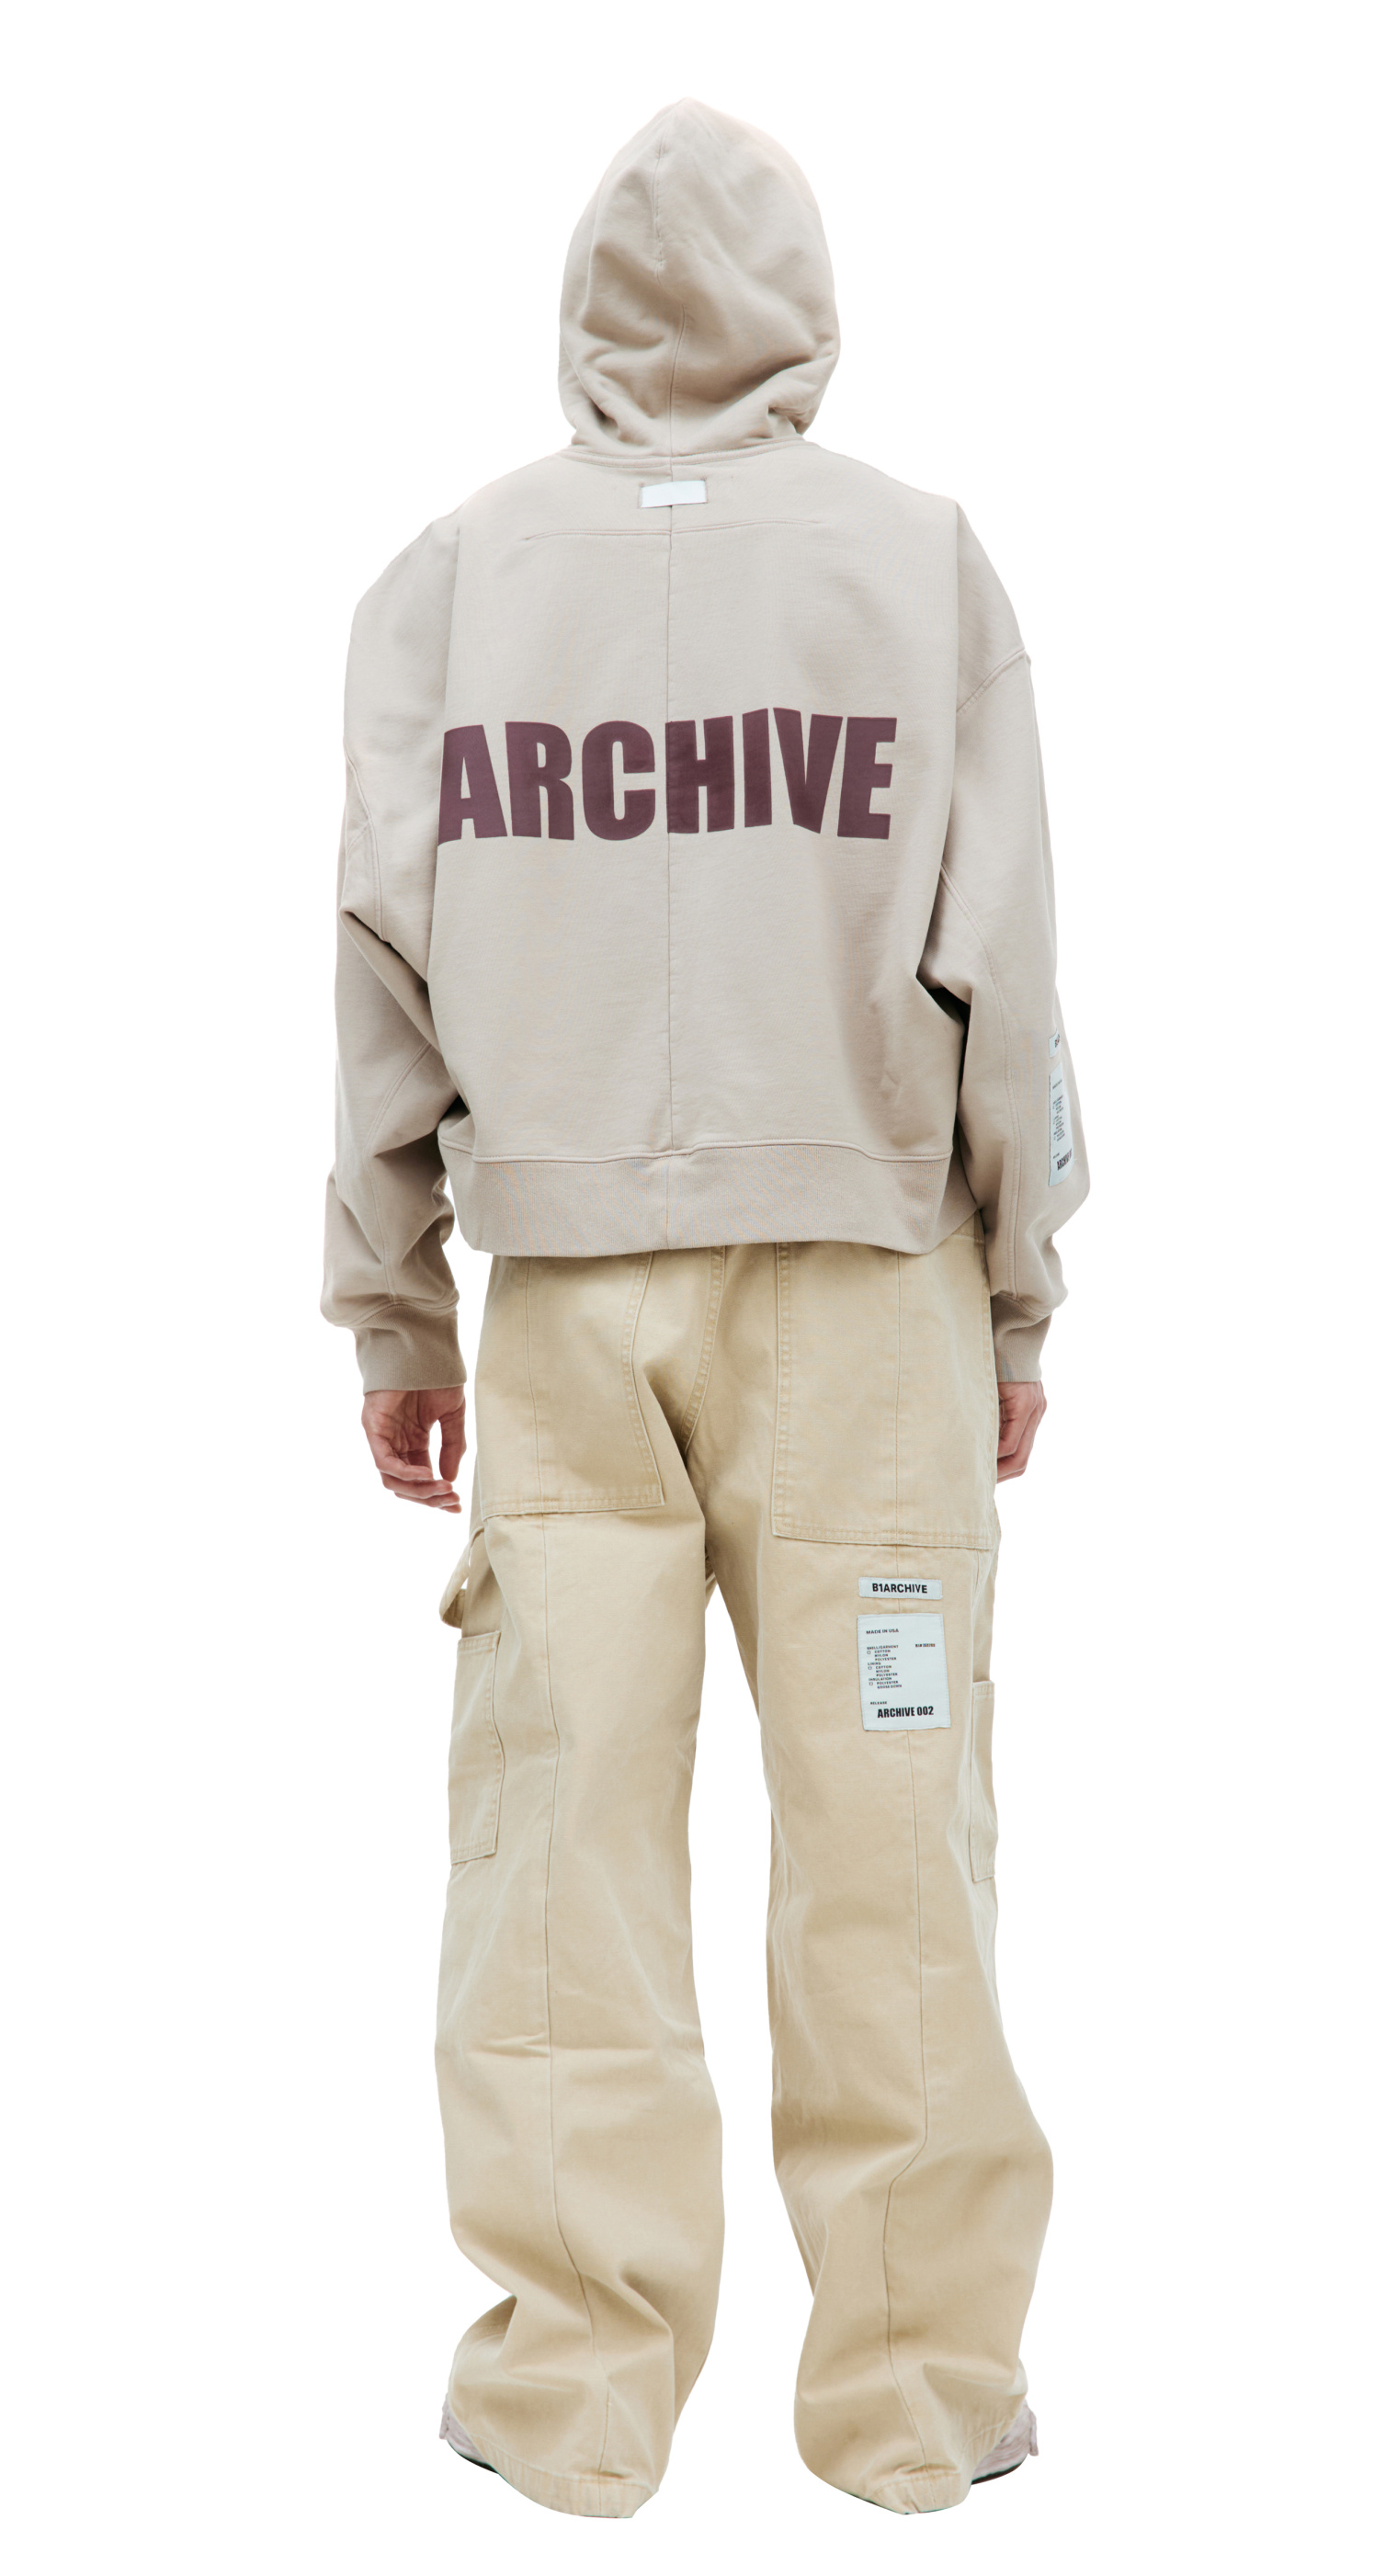 B1ARCHIVE Cropped cotton hoodie